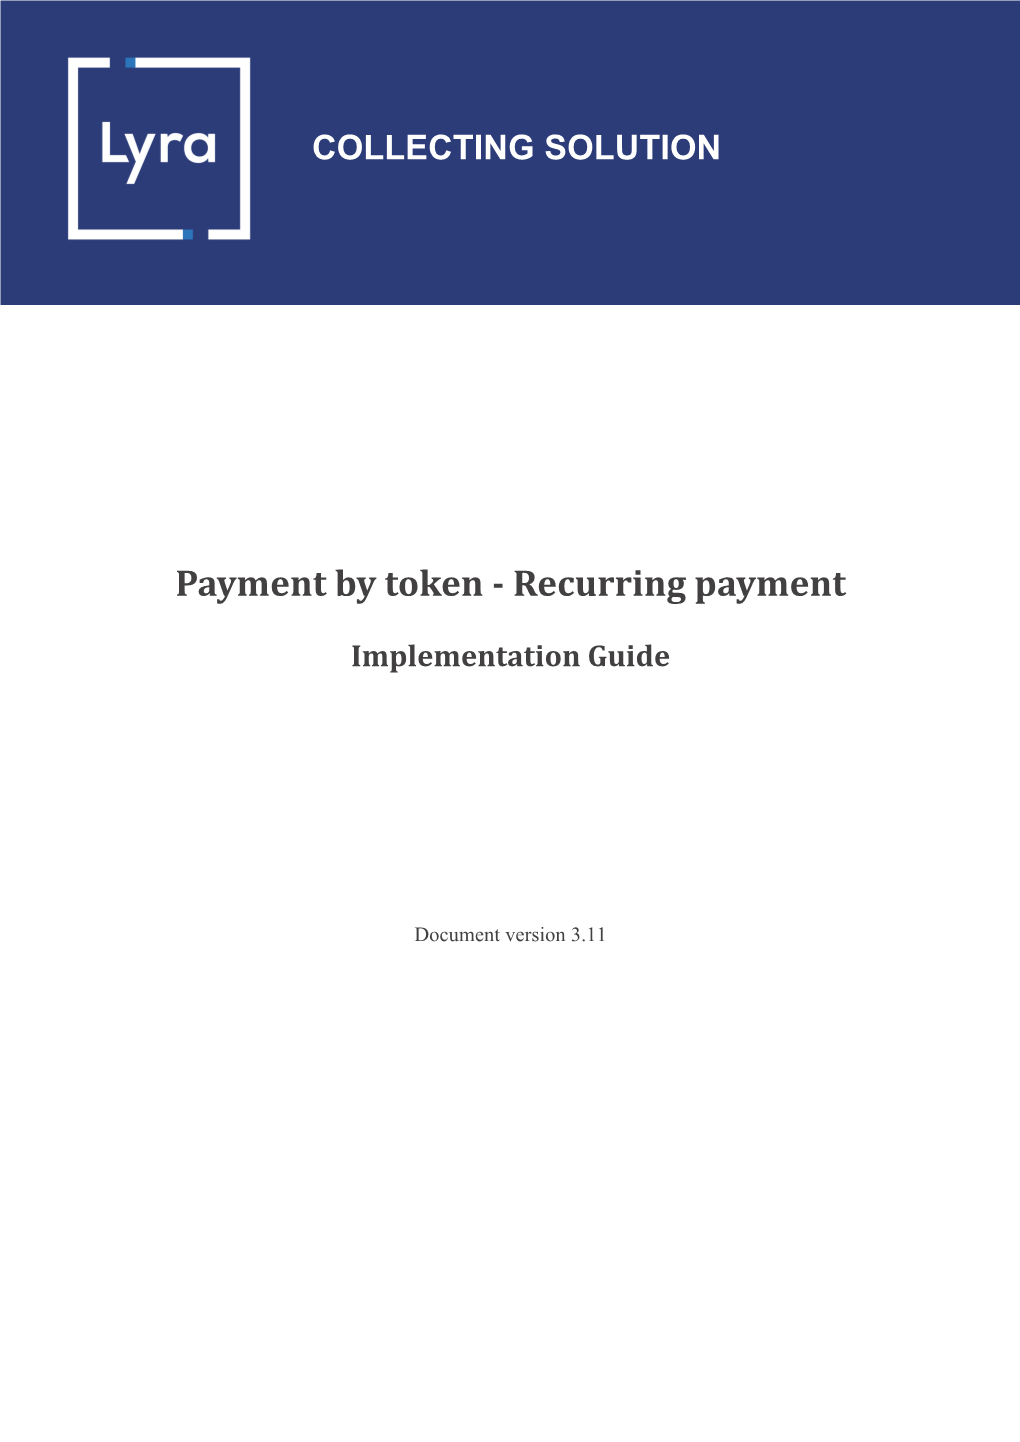 Payment by Token - Recurring Payment